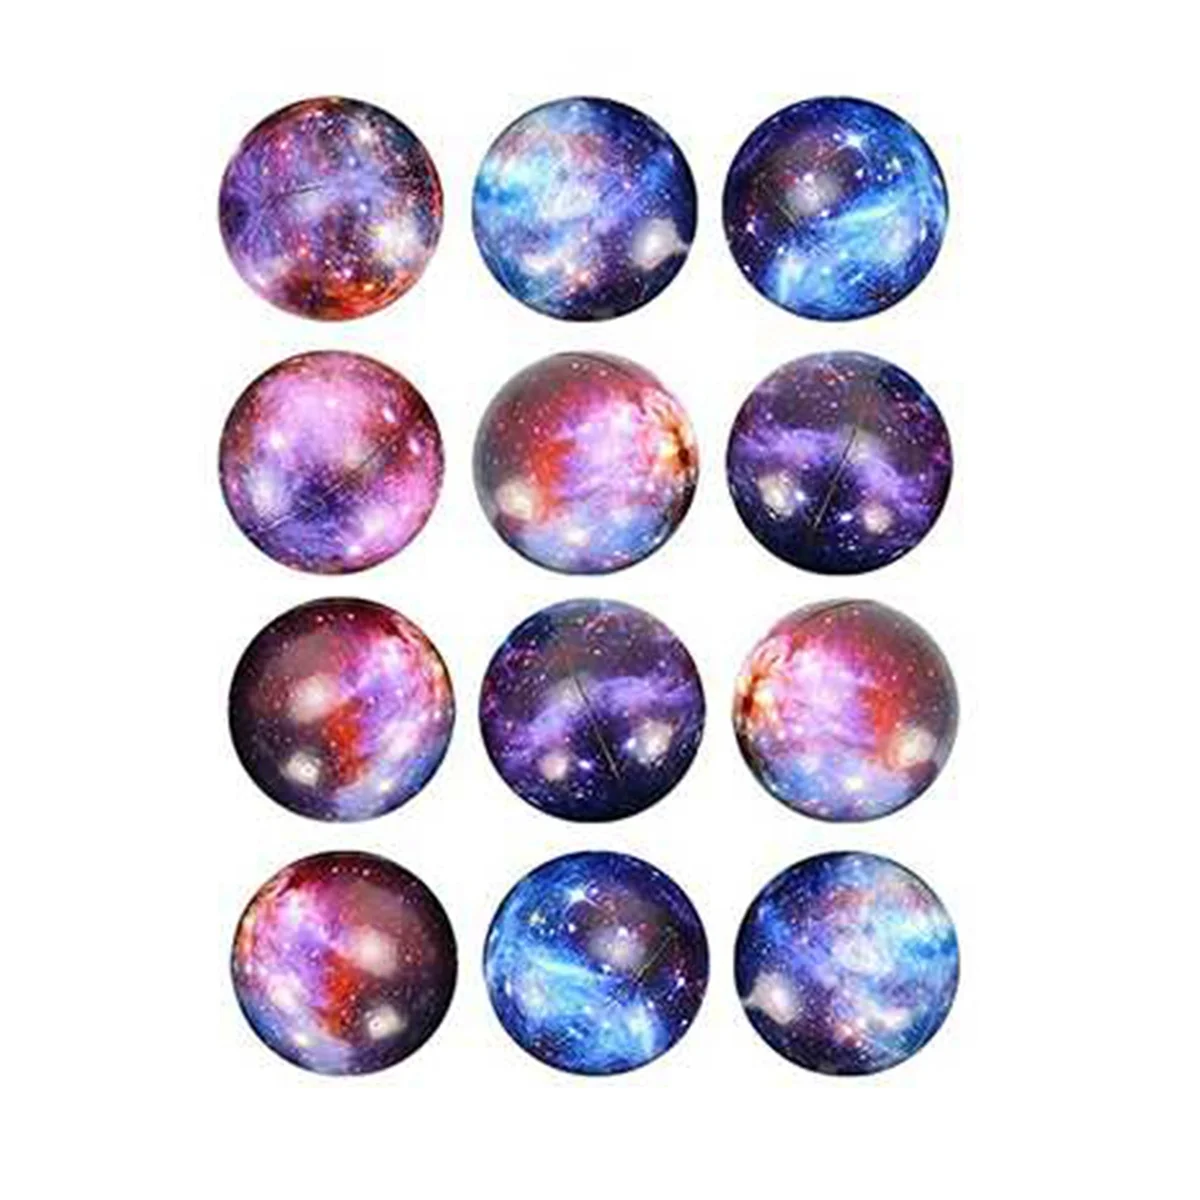 

Pack of 12 Galaxy Stress Balls for Kids,Squeeze Anxiety Fidget Sensory Balls for Children with Outer Space Theme